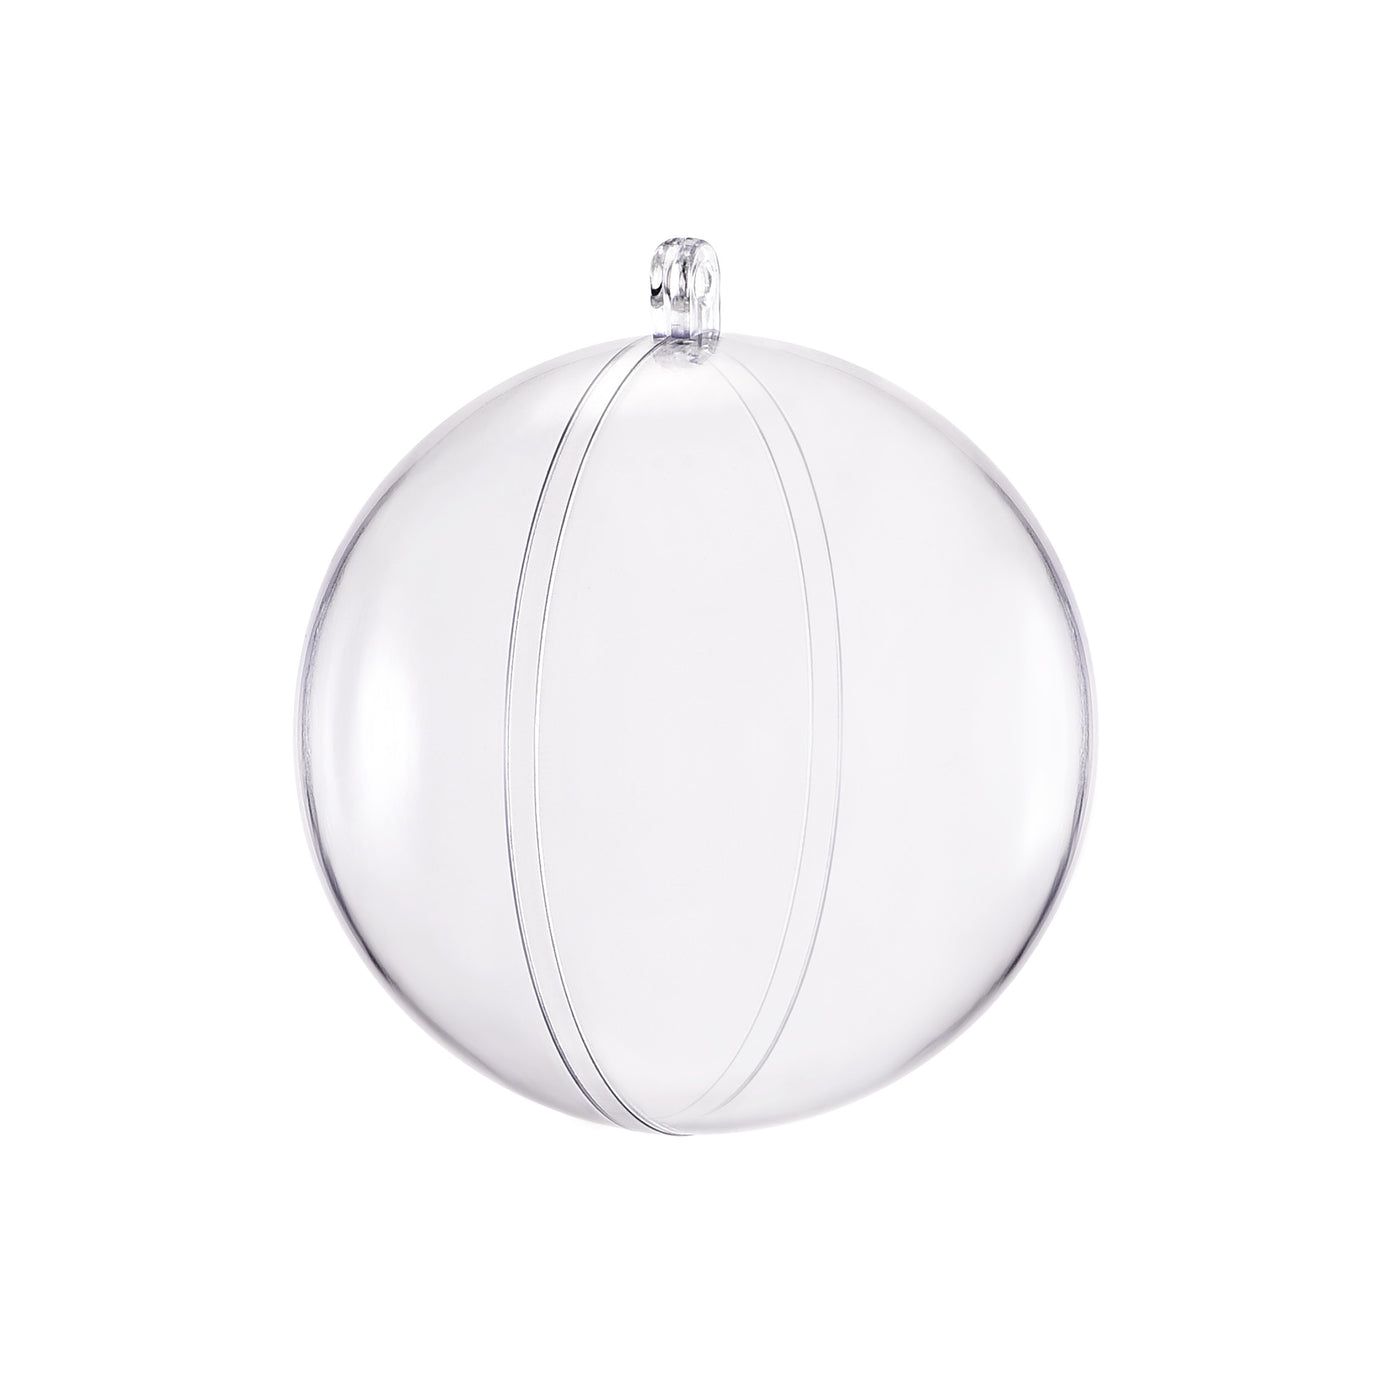 Uxcell Uxcell 24pcs 2 3/8-inch(60mm) Clear Plastic Ornaments Ball